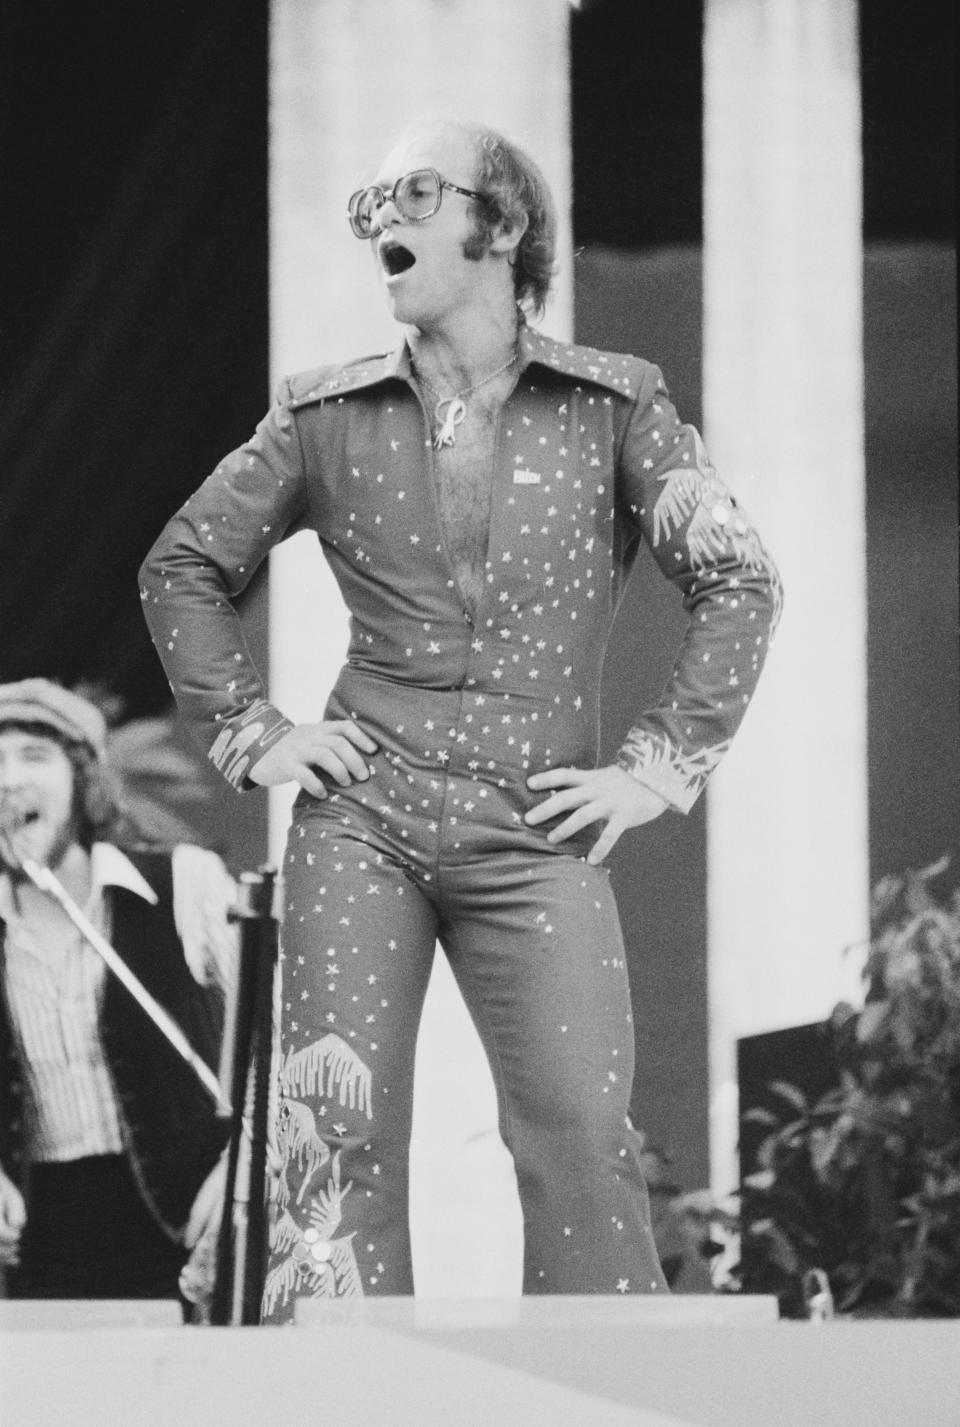 John performs at the Midsummer Music one-day festival at Wembley Stadium in London, June 1975.&nbsp;